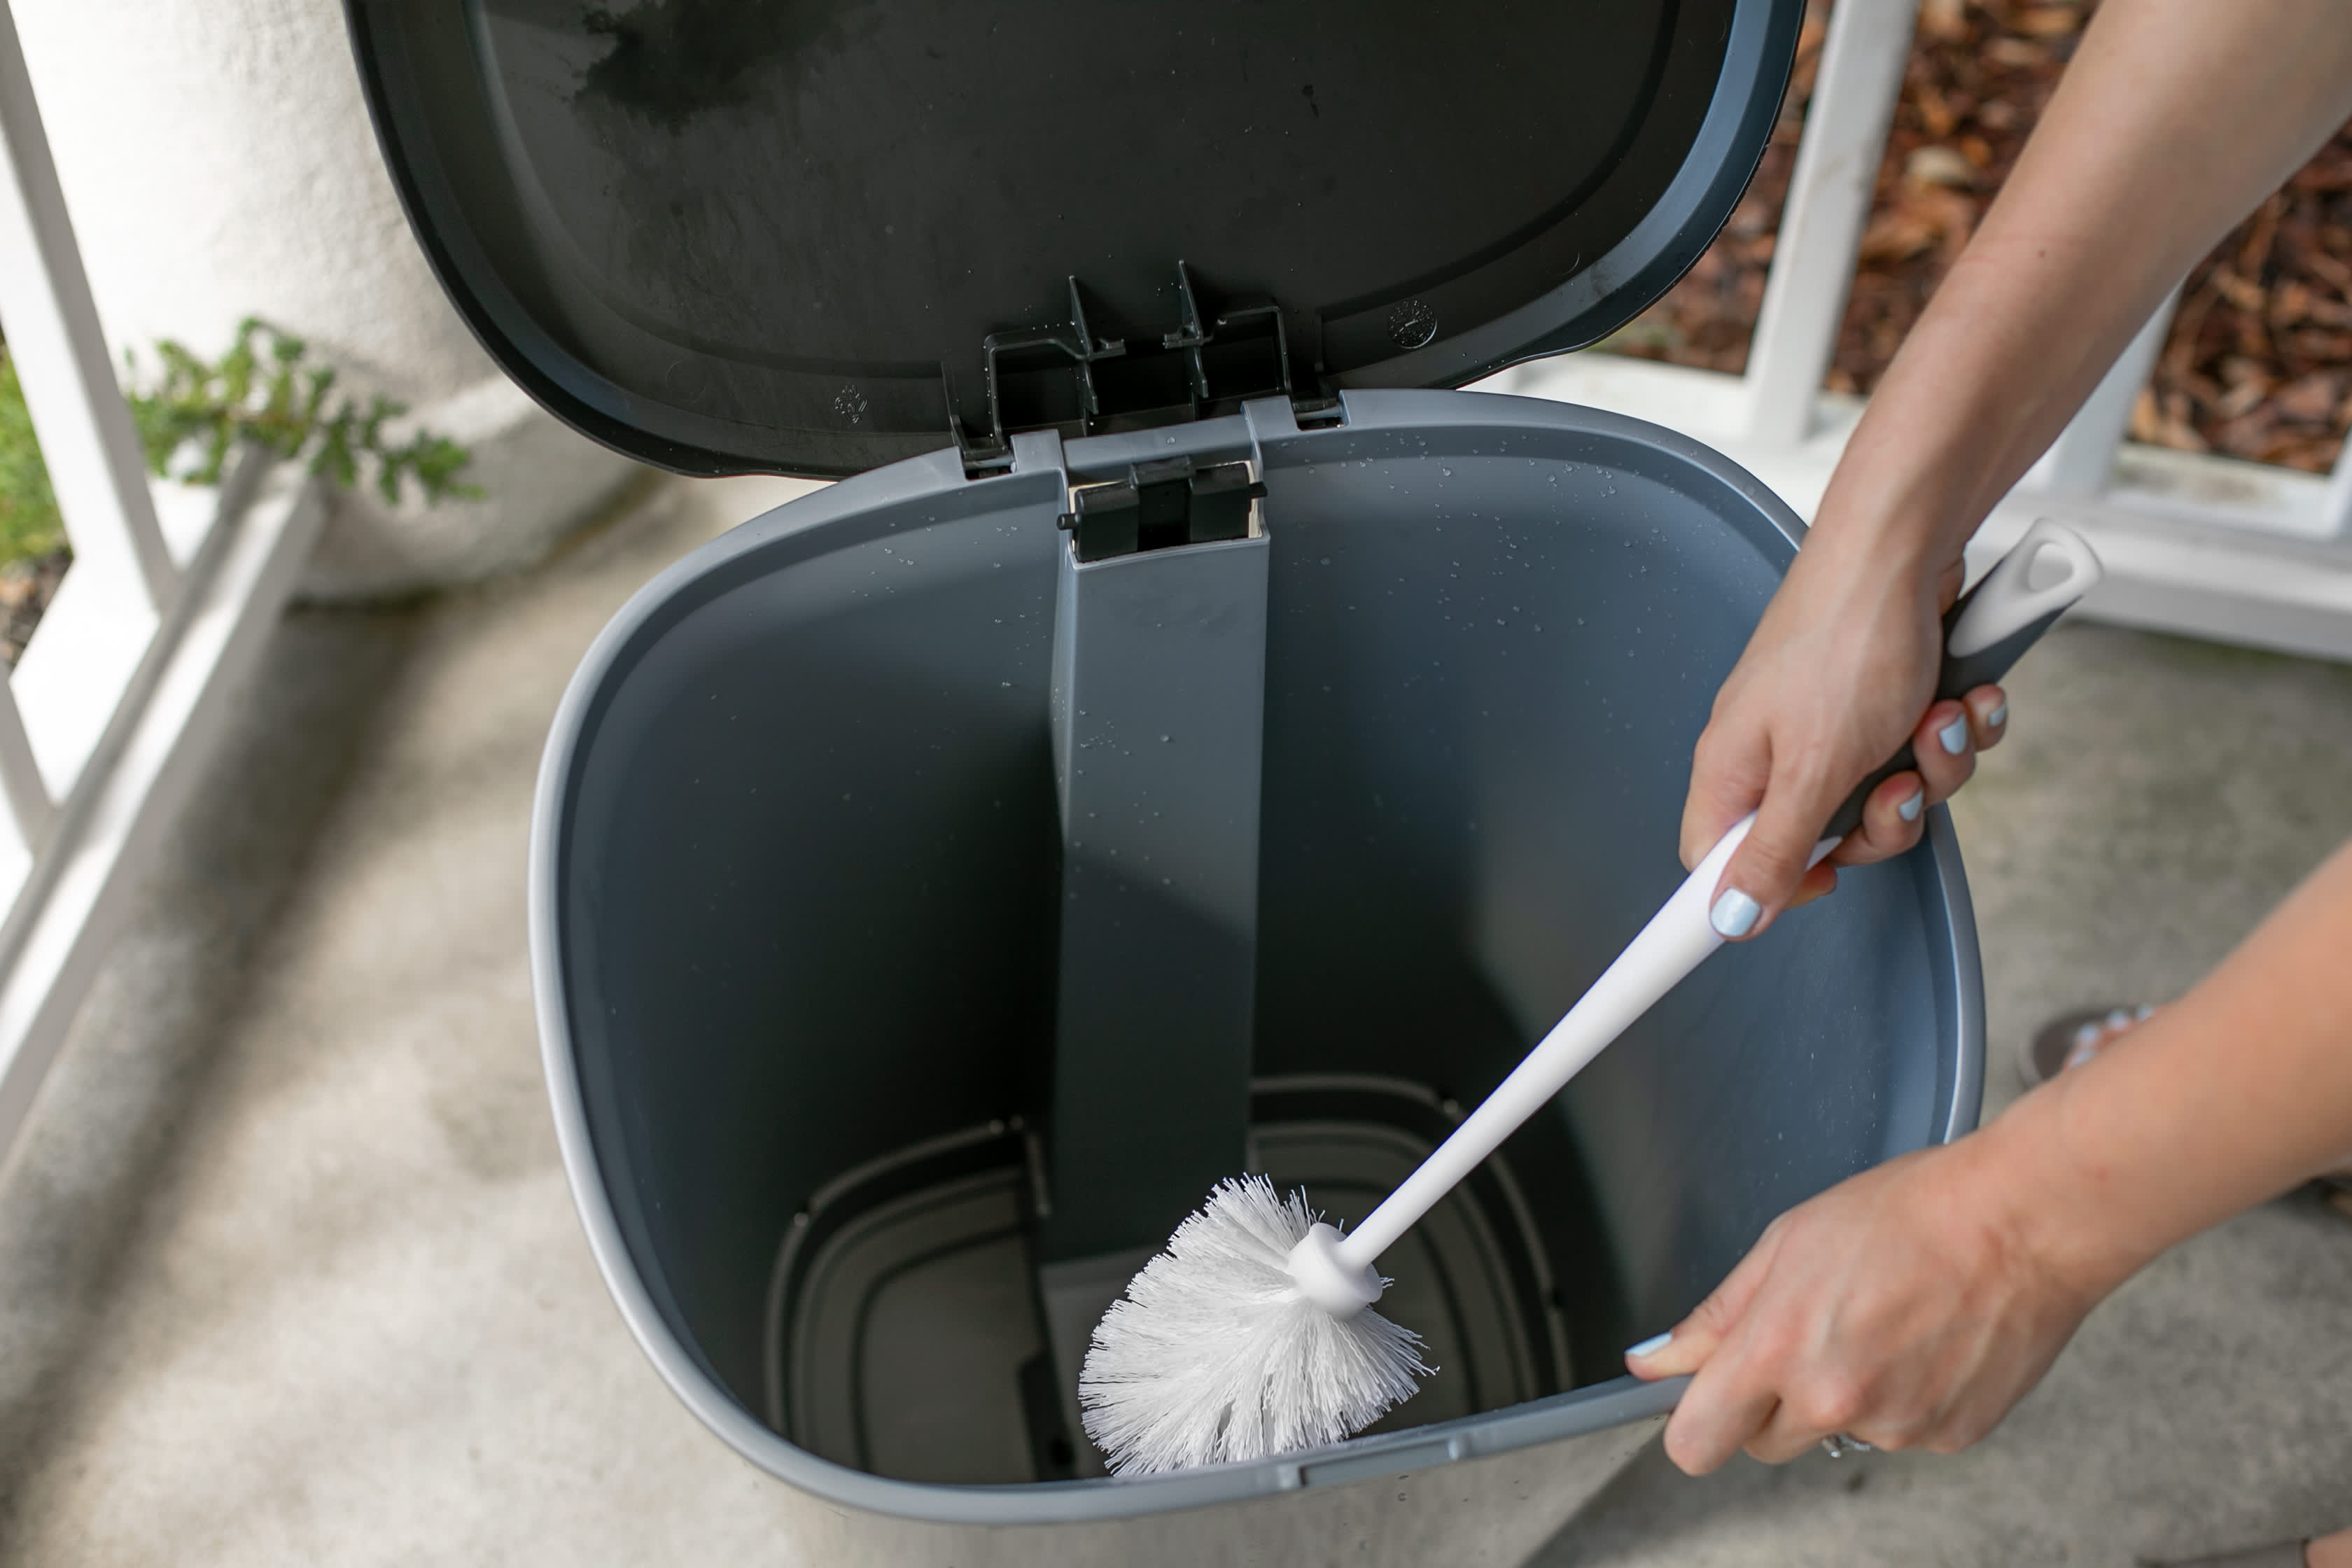 How To Clean Trash Can How to Clean Your Trash Can: A Step by Step Guide | Apartment Therapy